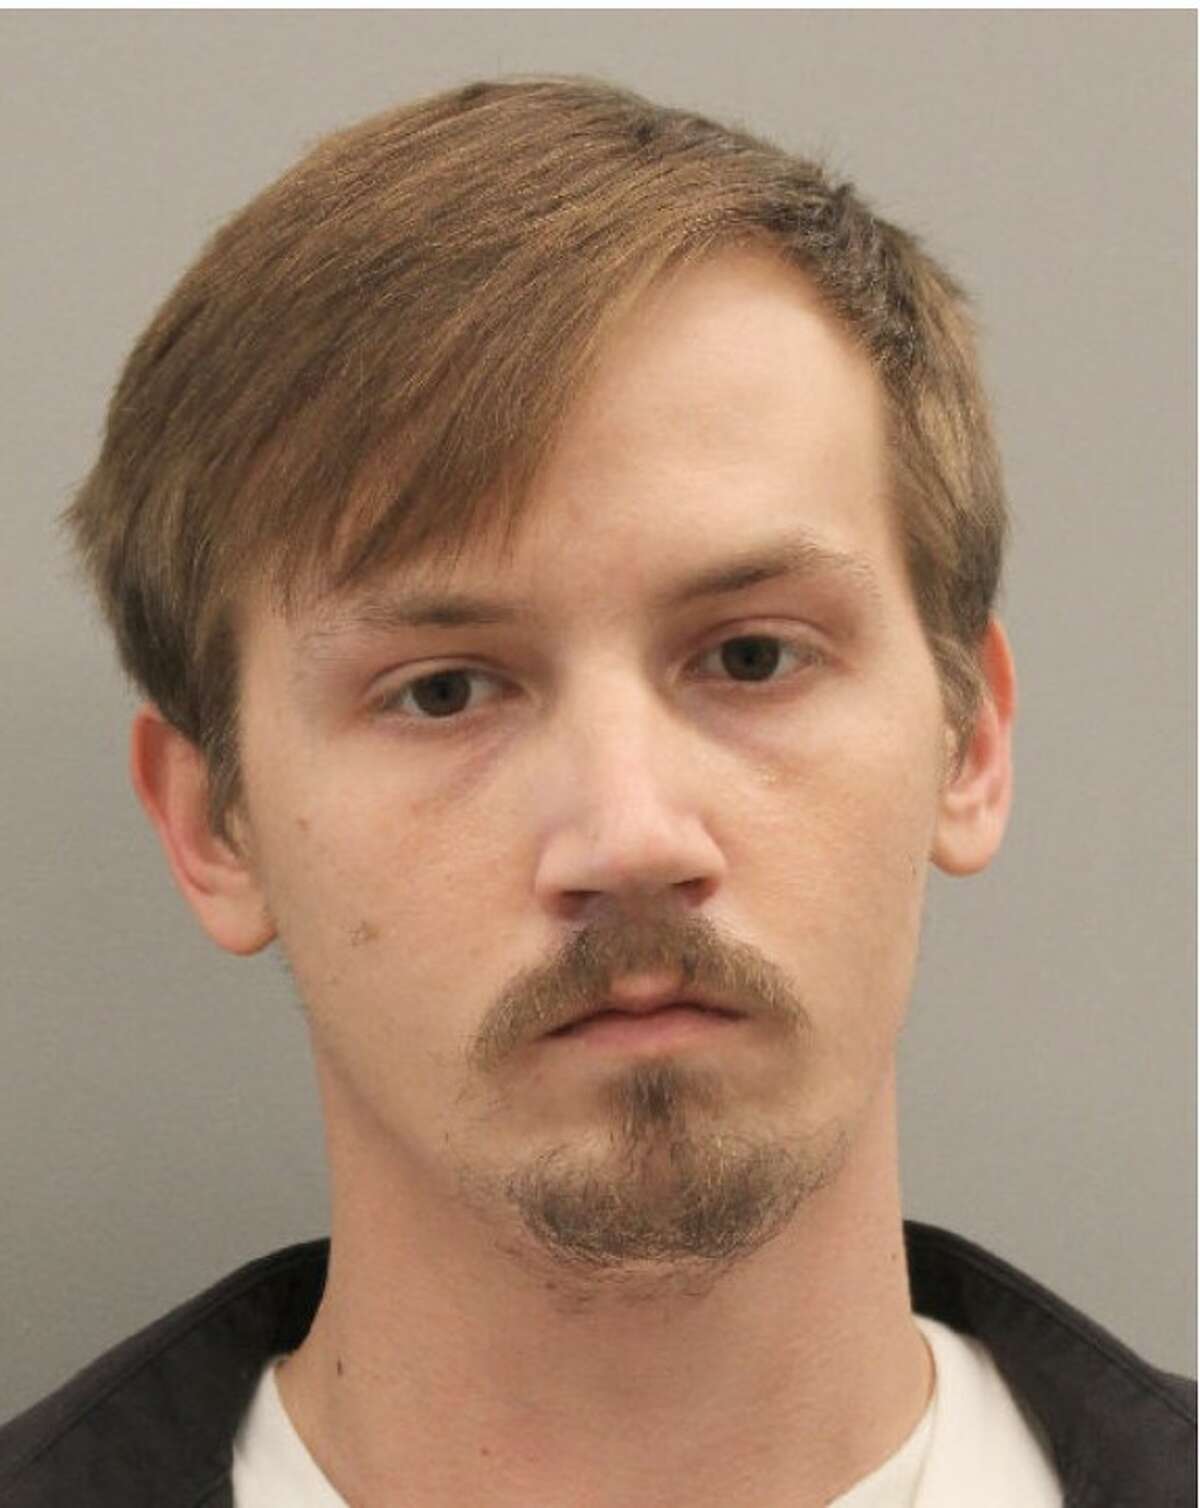 Brandon Joseph Bonds, 26, pleaded guilty to aggravated sexual assault of child and was sentenced to 25 years for a 2018 incident where he molested a 4-year-old girl in her home, according to the Harris County District Attorney's Office.